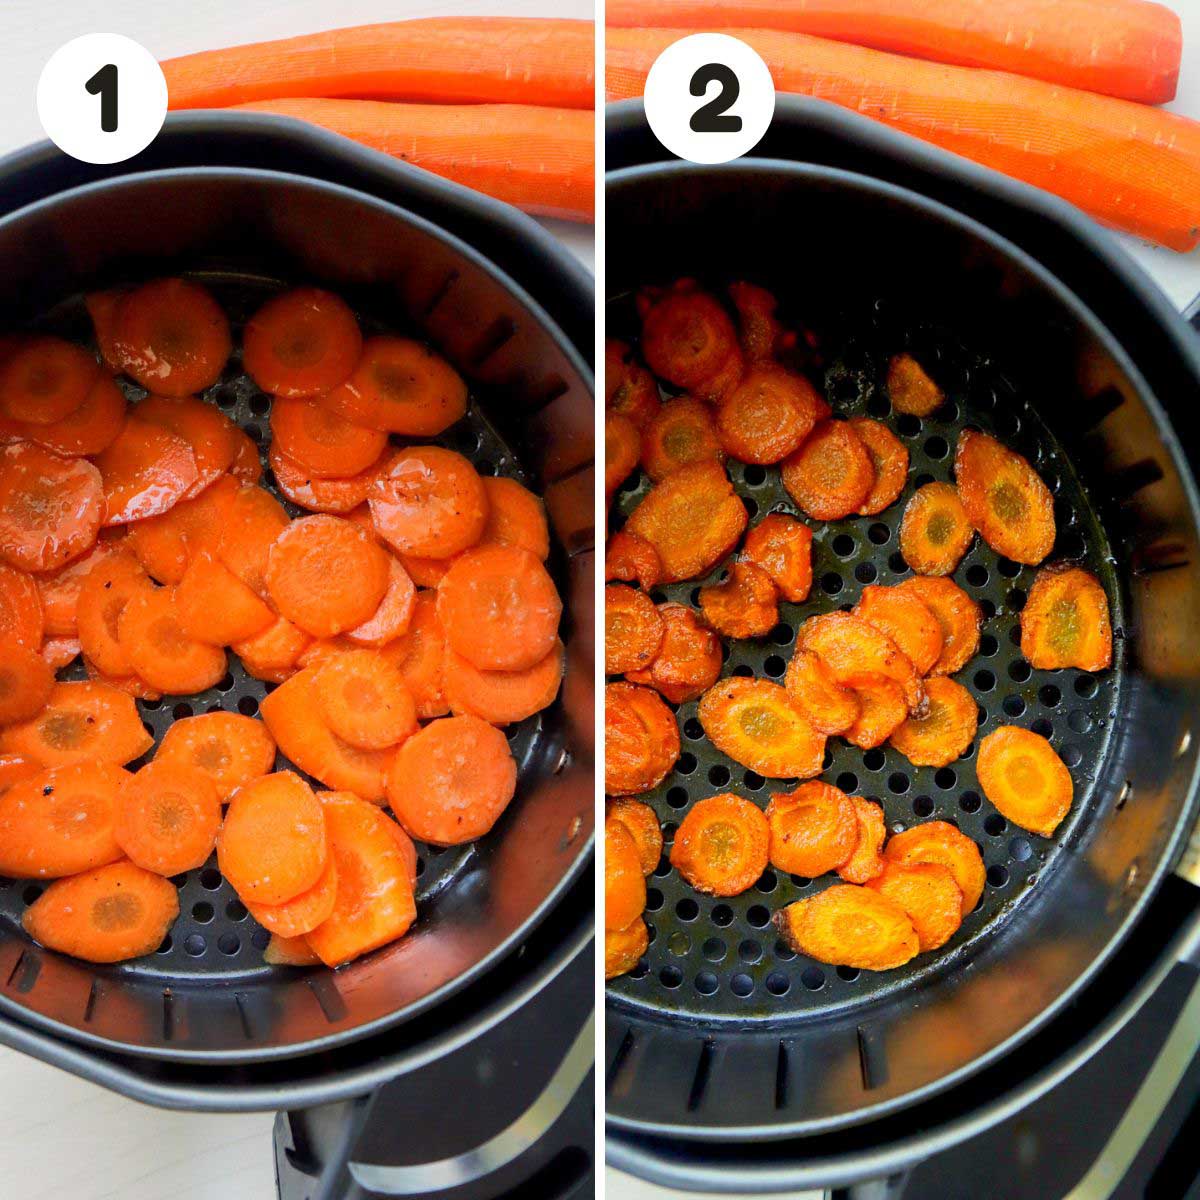 Steps to make the carrot chips.